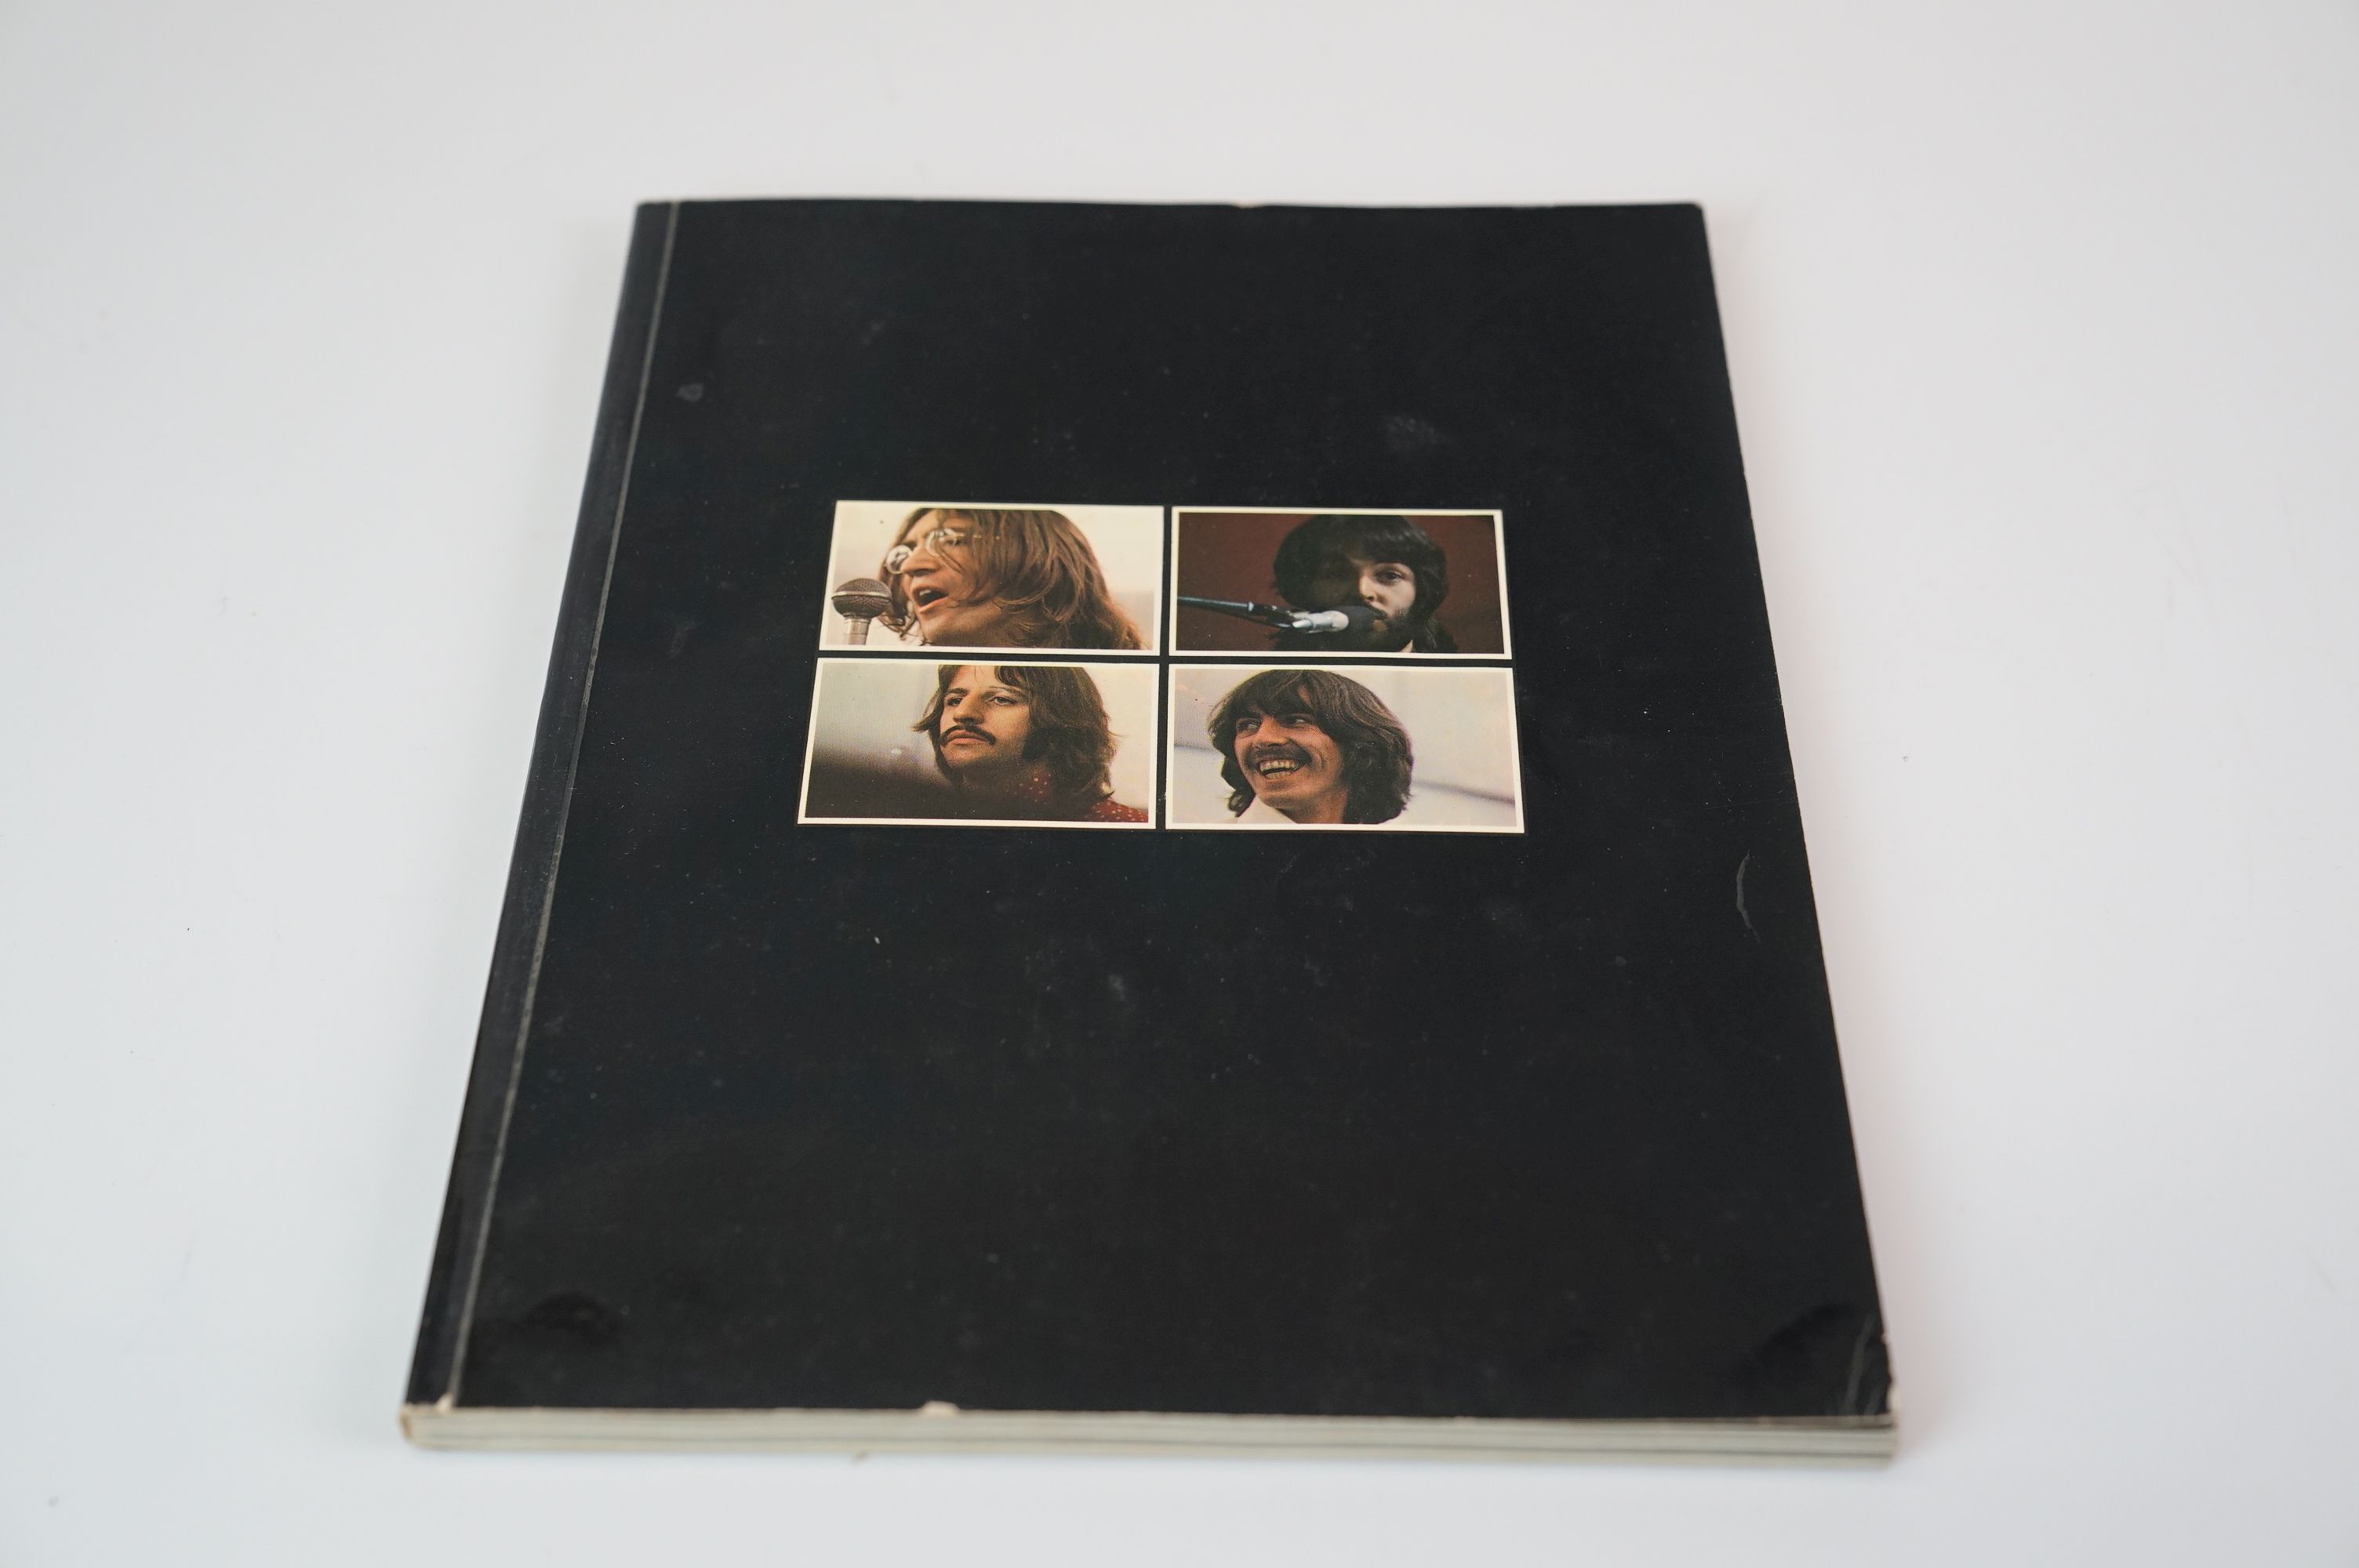 Vinyl - The Beatles Let It Be Box set with record and book, laminated cover, vg overall - Image 4 of 10